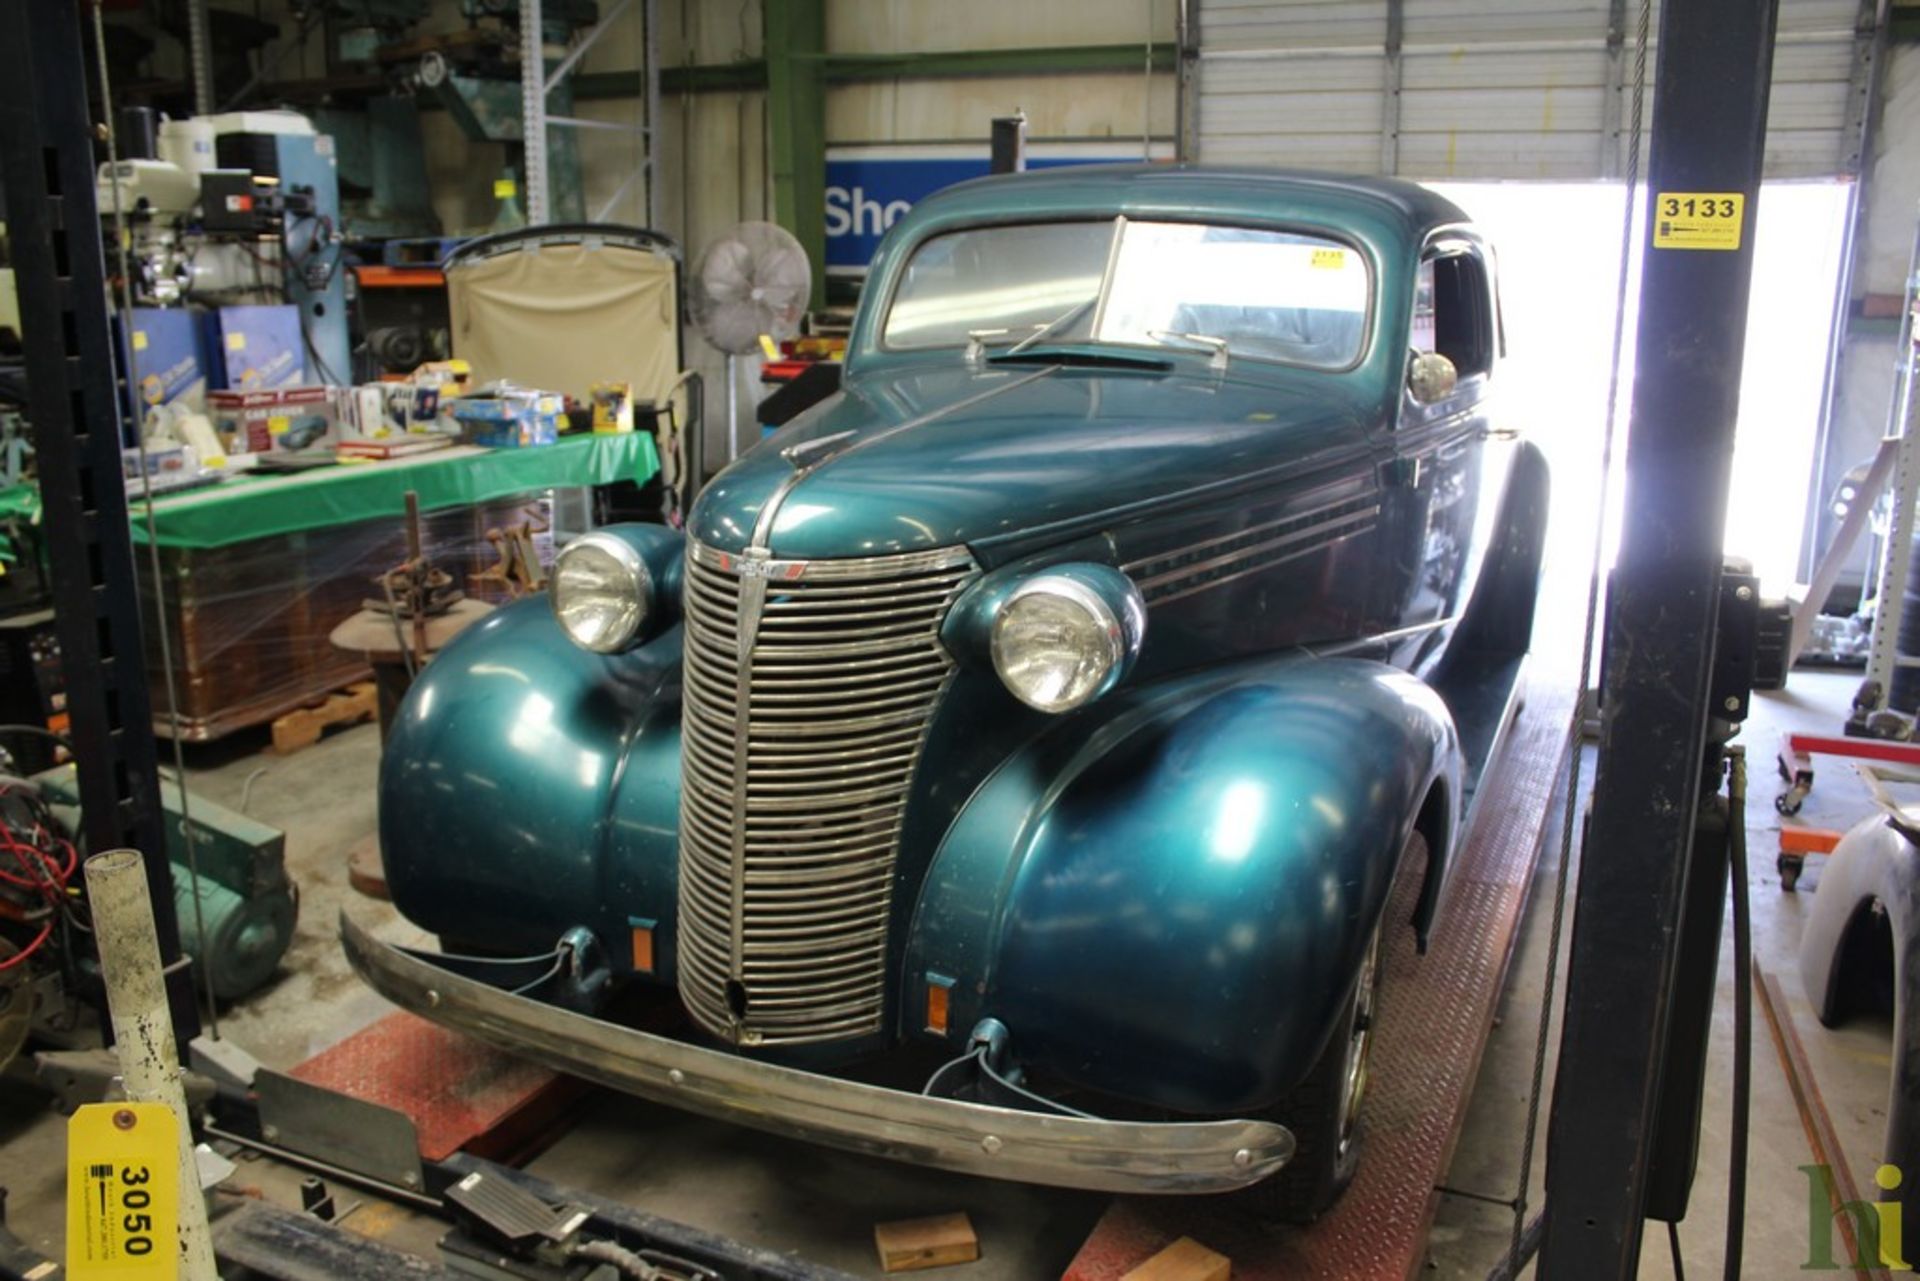 1938 CHEVROLET COUPE, BODY & RUNNING GEAR ONLY, NO ENGINE OR TRANMISSION, VIN C1100410101, STYLE NO. - Image 2 of 23